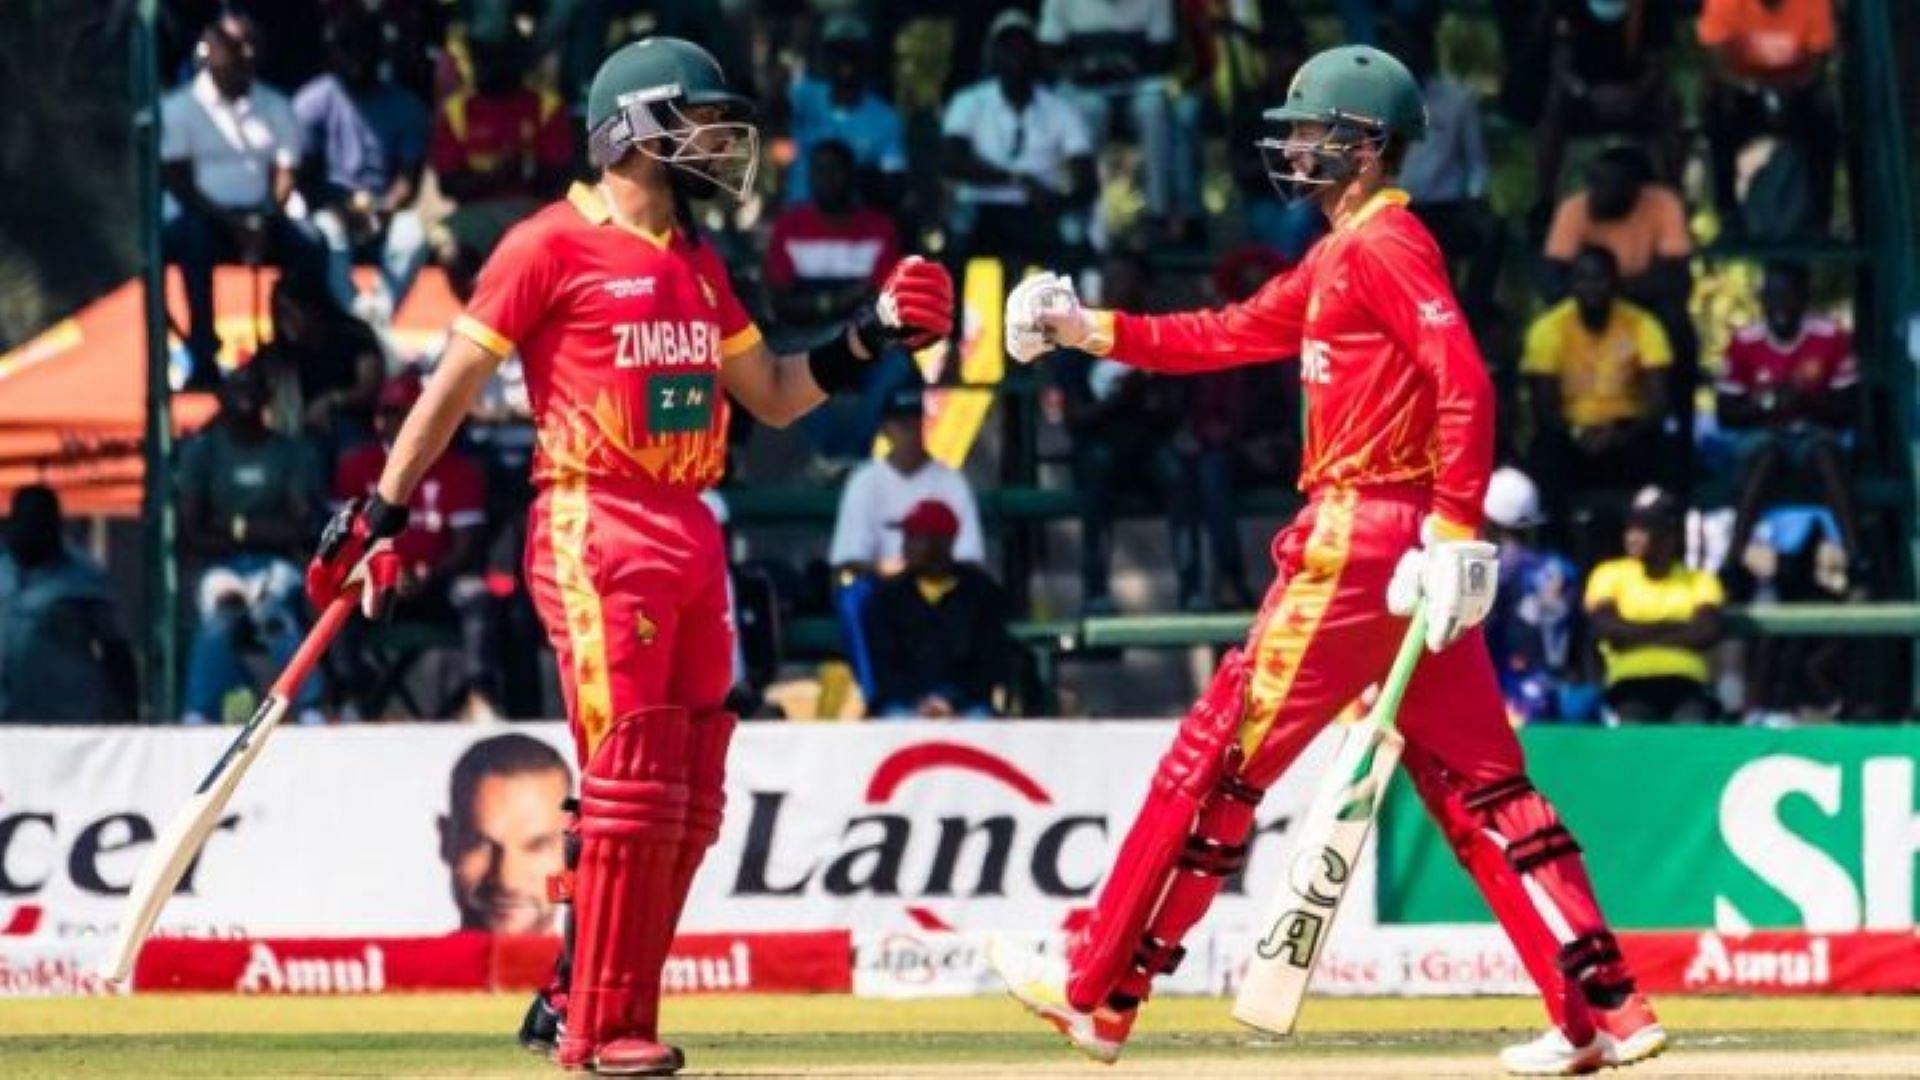 St.Lucia will hope for the Zimbabwean duo to deliver the goods.